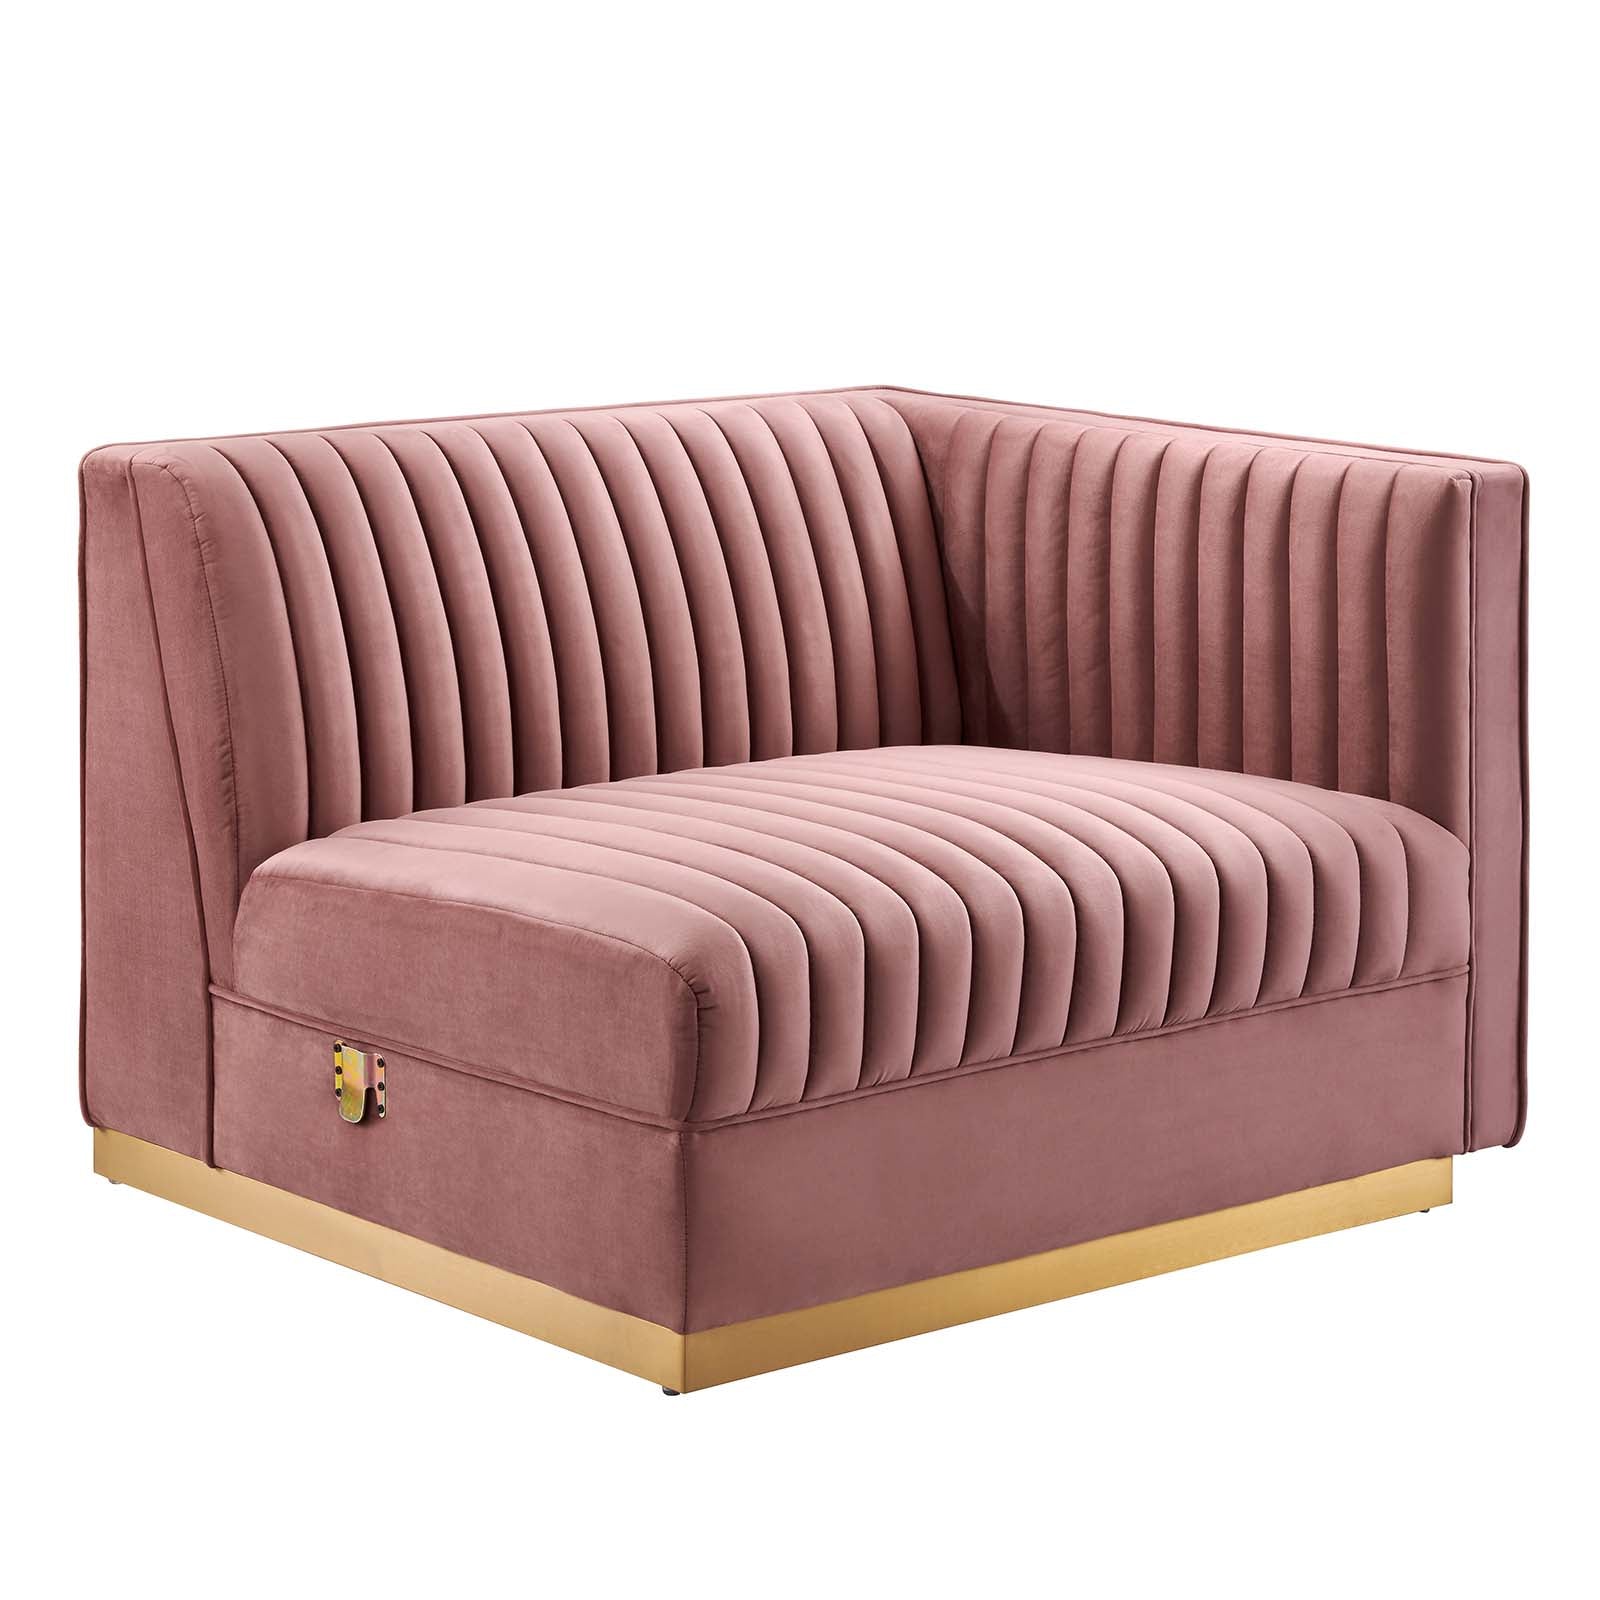 Modway Sectional Sofas - Sanguine Channel Tufted Performance Velvet 7-Piece Left-Facing Modular Sectional Sofa Dusty Rose